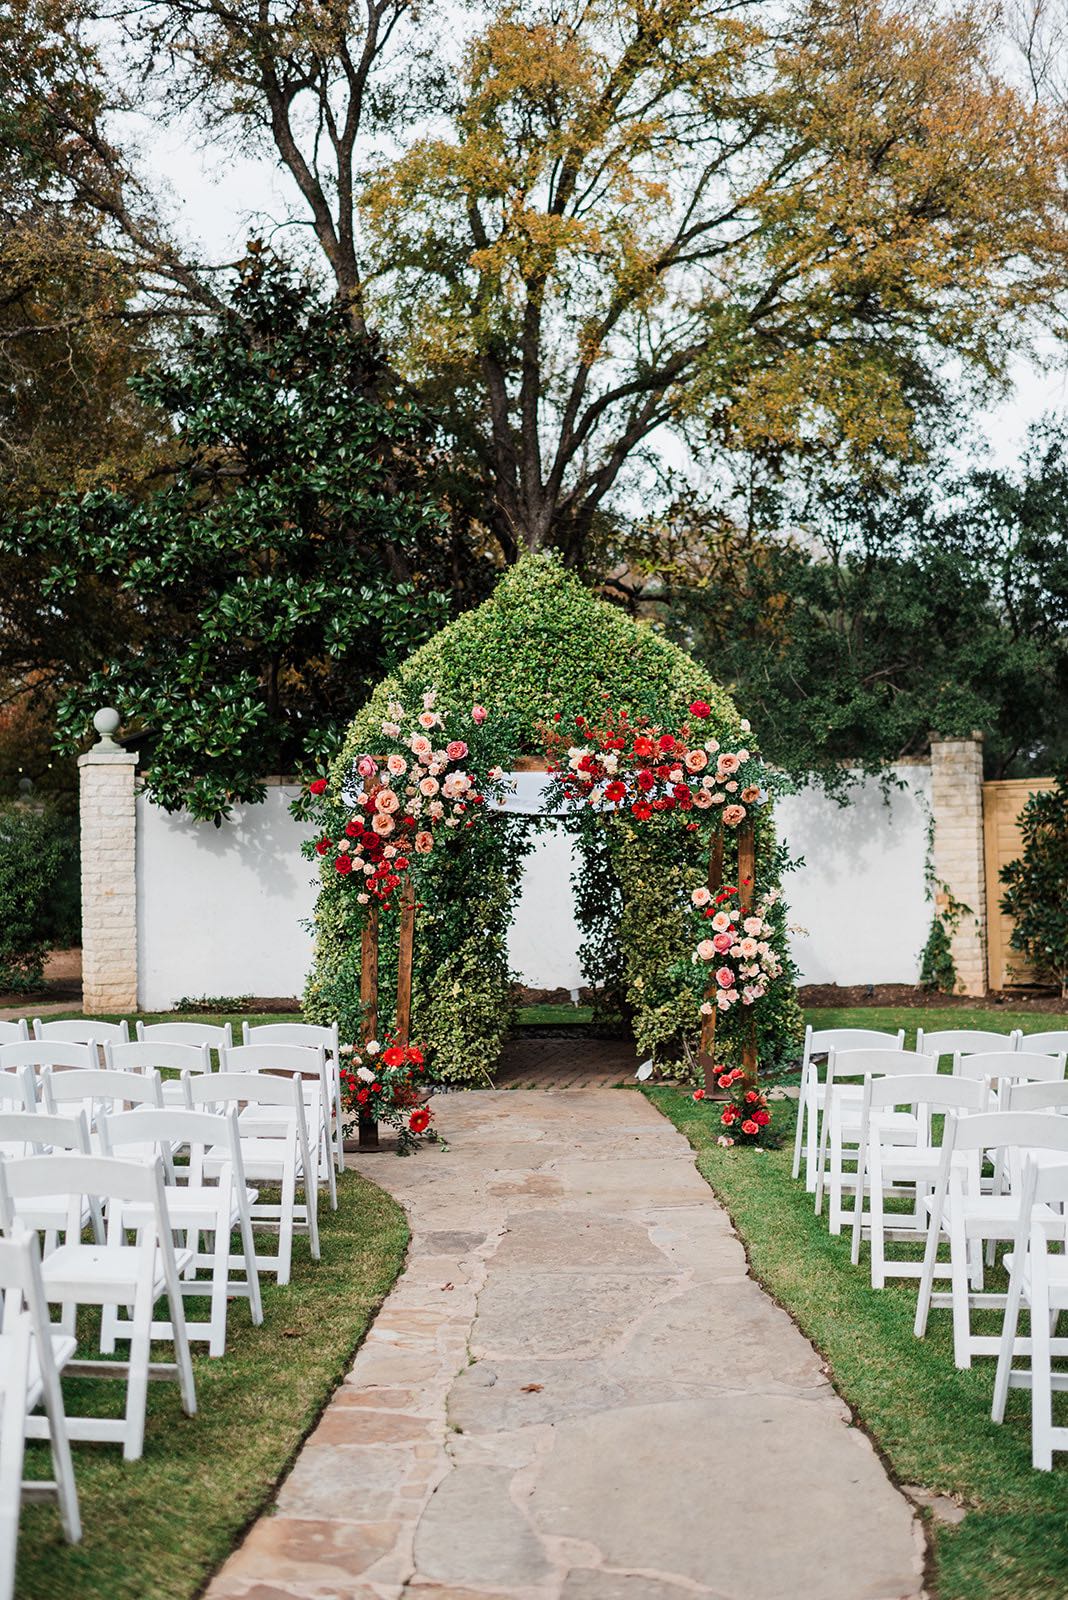 Garden wedding ceremony site with colorful chuppah